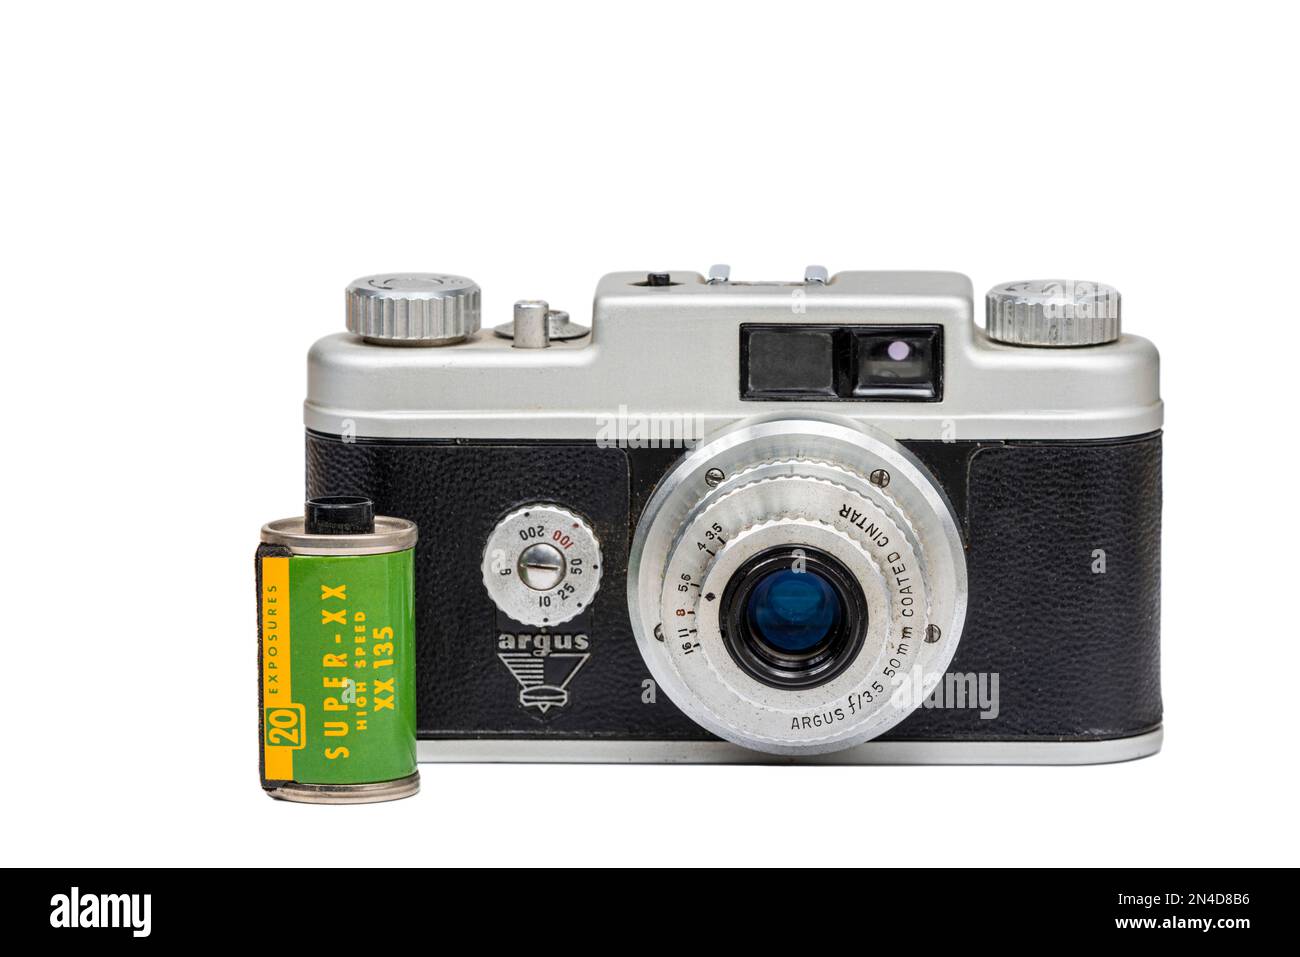 Maryville, Tennessee - February 2, 2023: A 1950s era Argus camera with a roll of Kodak black & white film from the same time period. Stock Photo